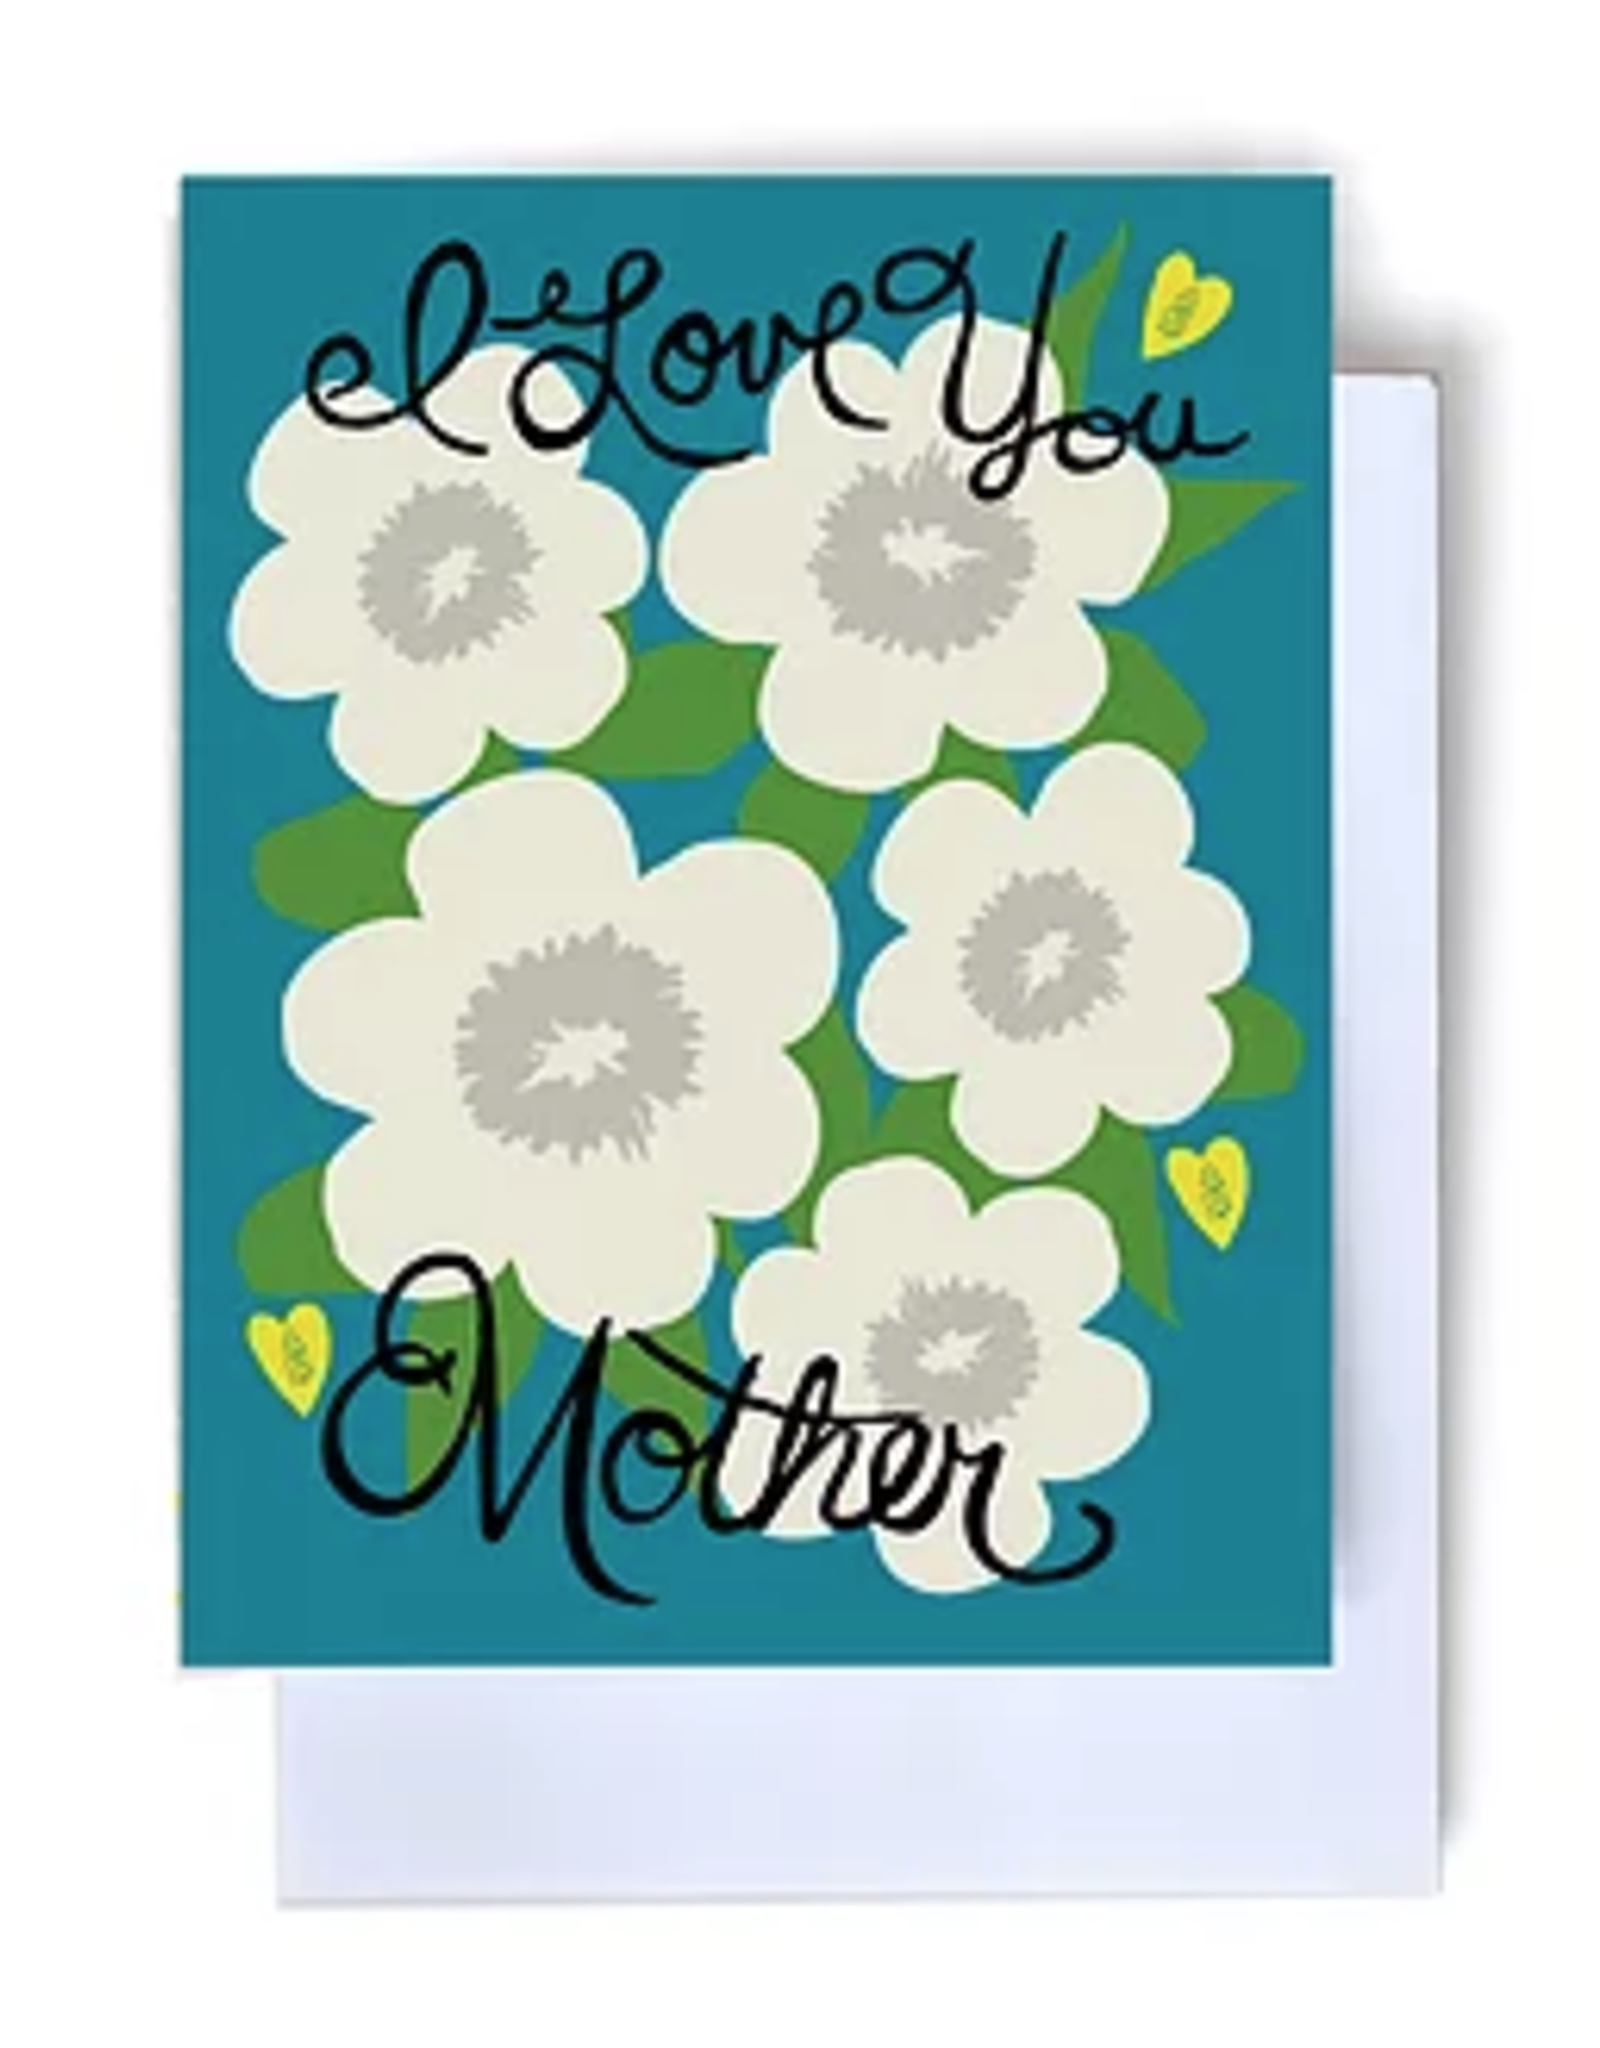 I Love You Mother Greeting Card